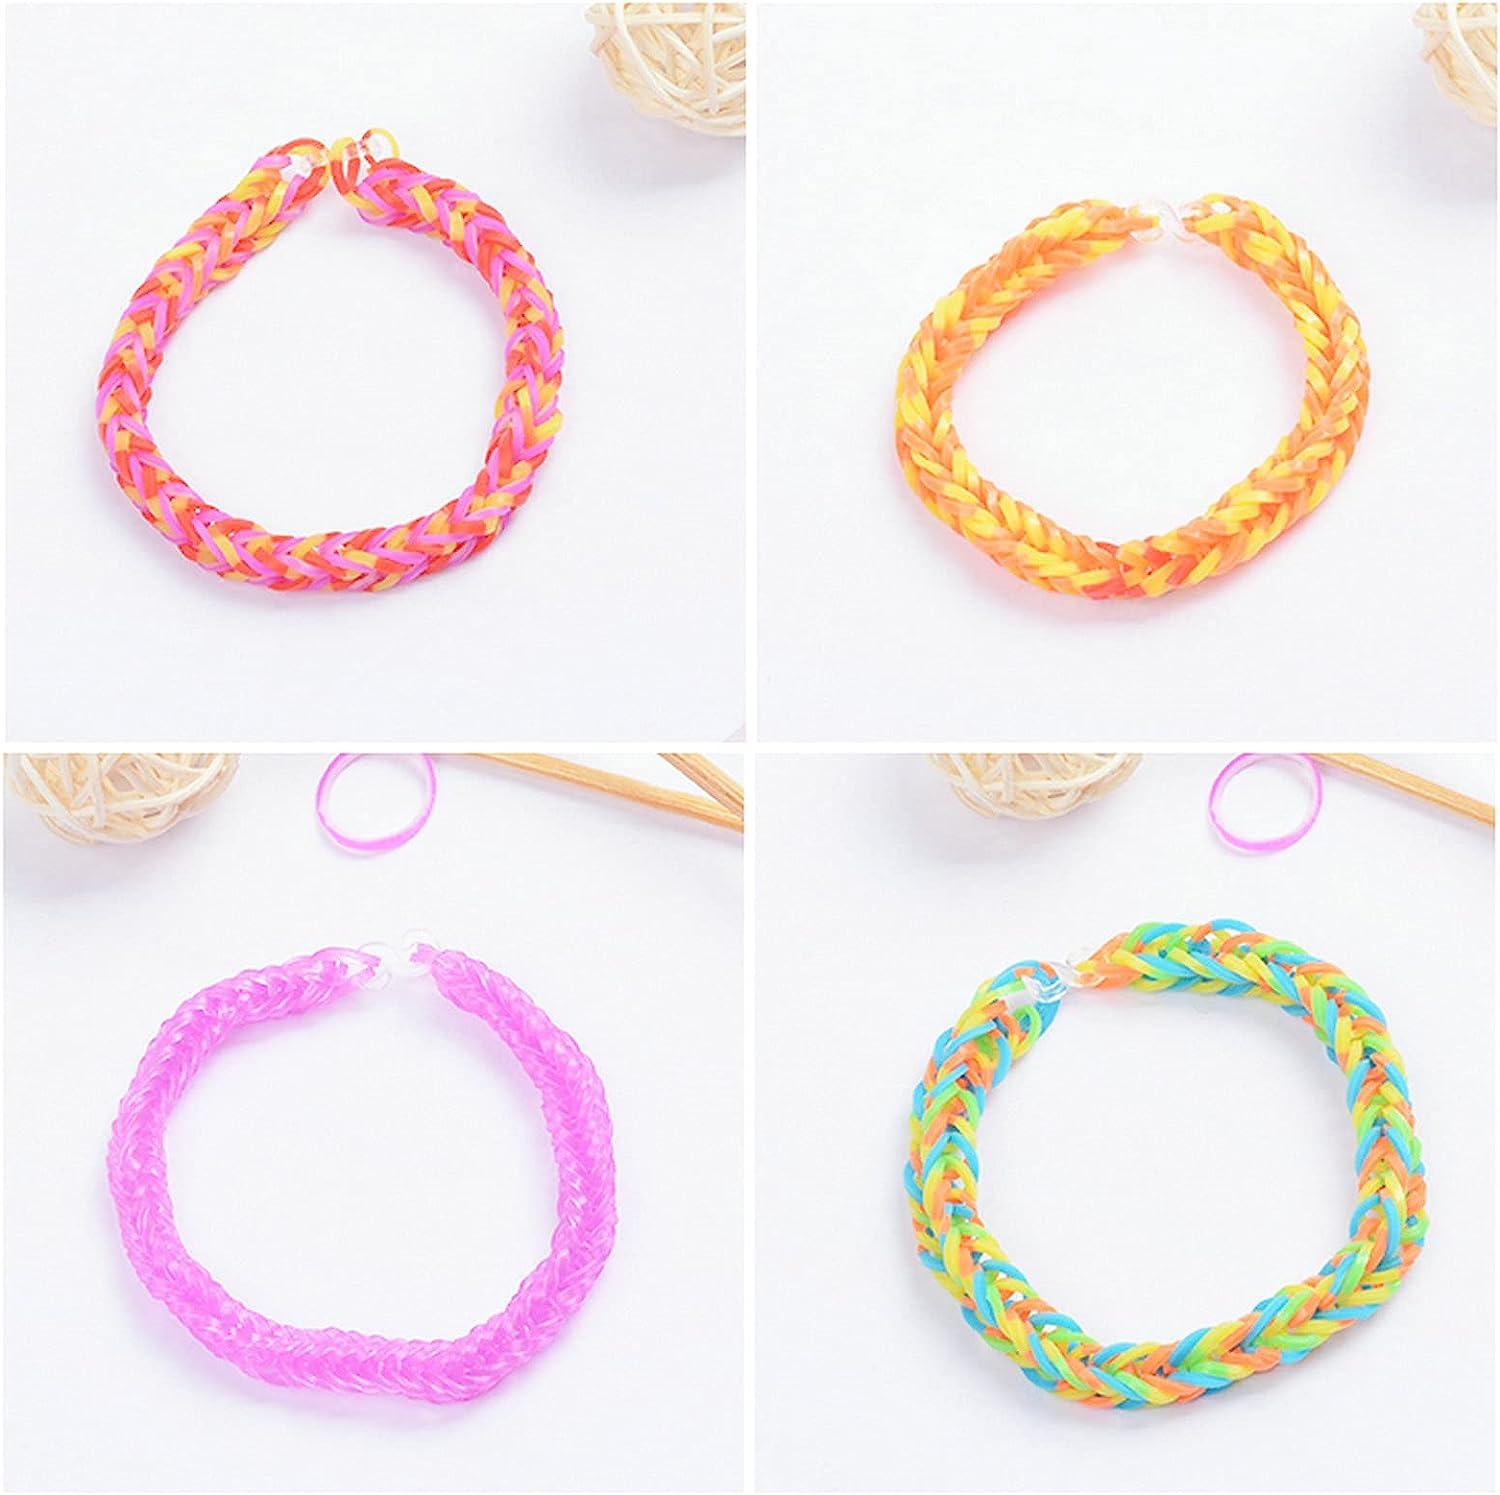 Planet of Toys DIY Fashion Loom The Ultimate Rubber band bracelet